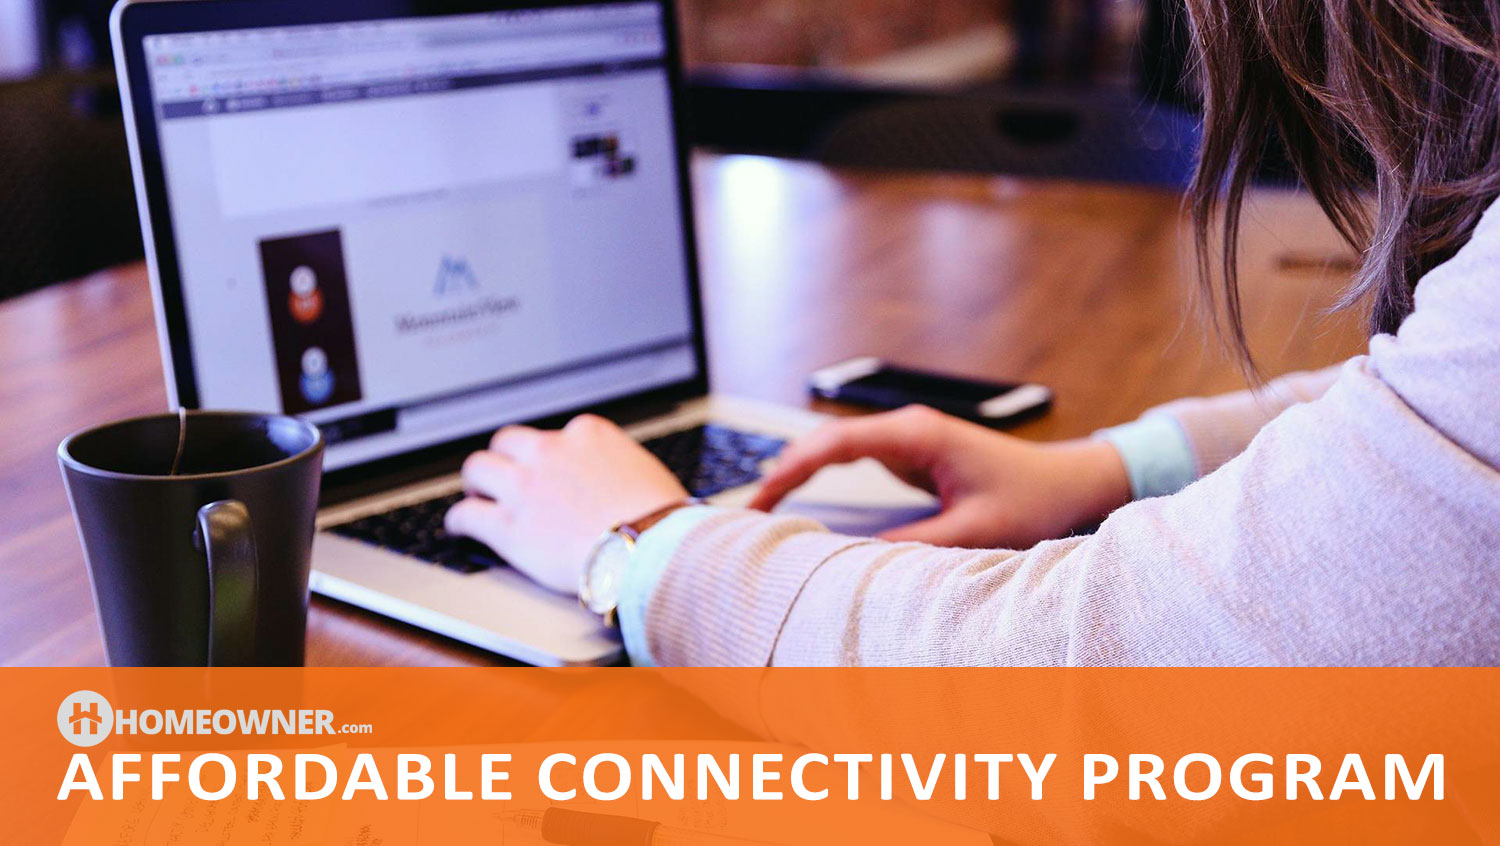 What Is the Affordable Connectivity Program?